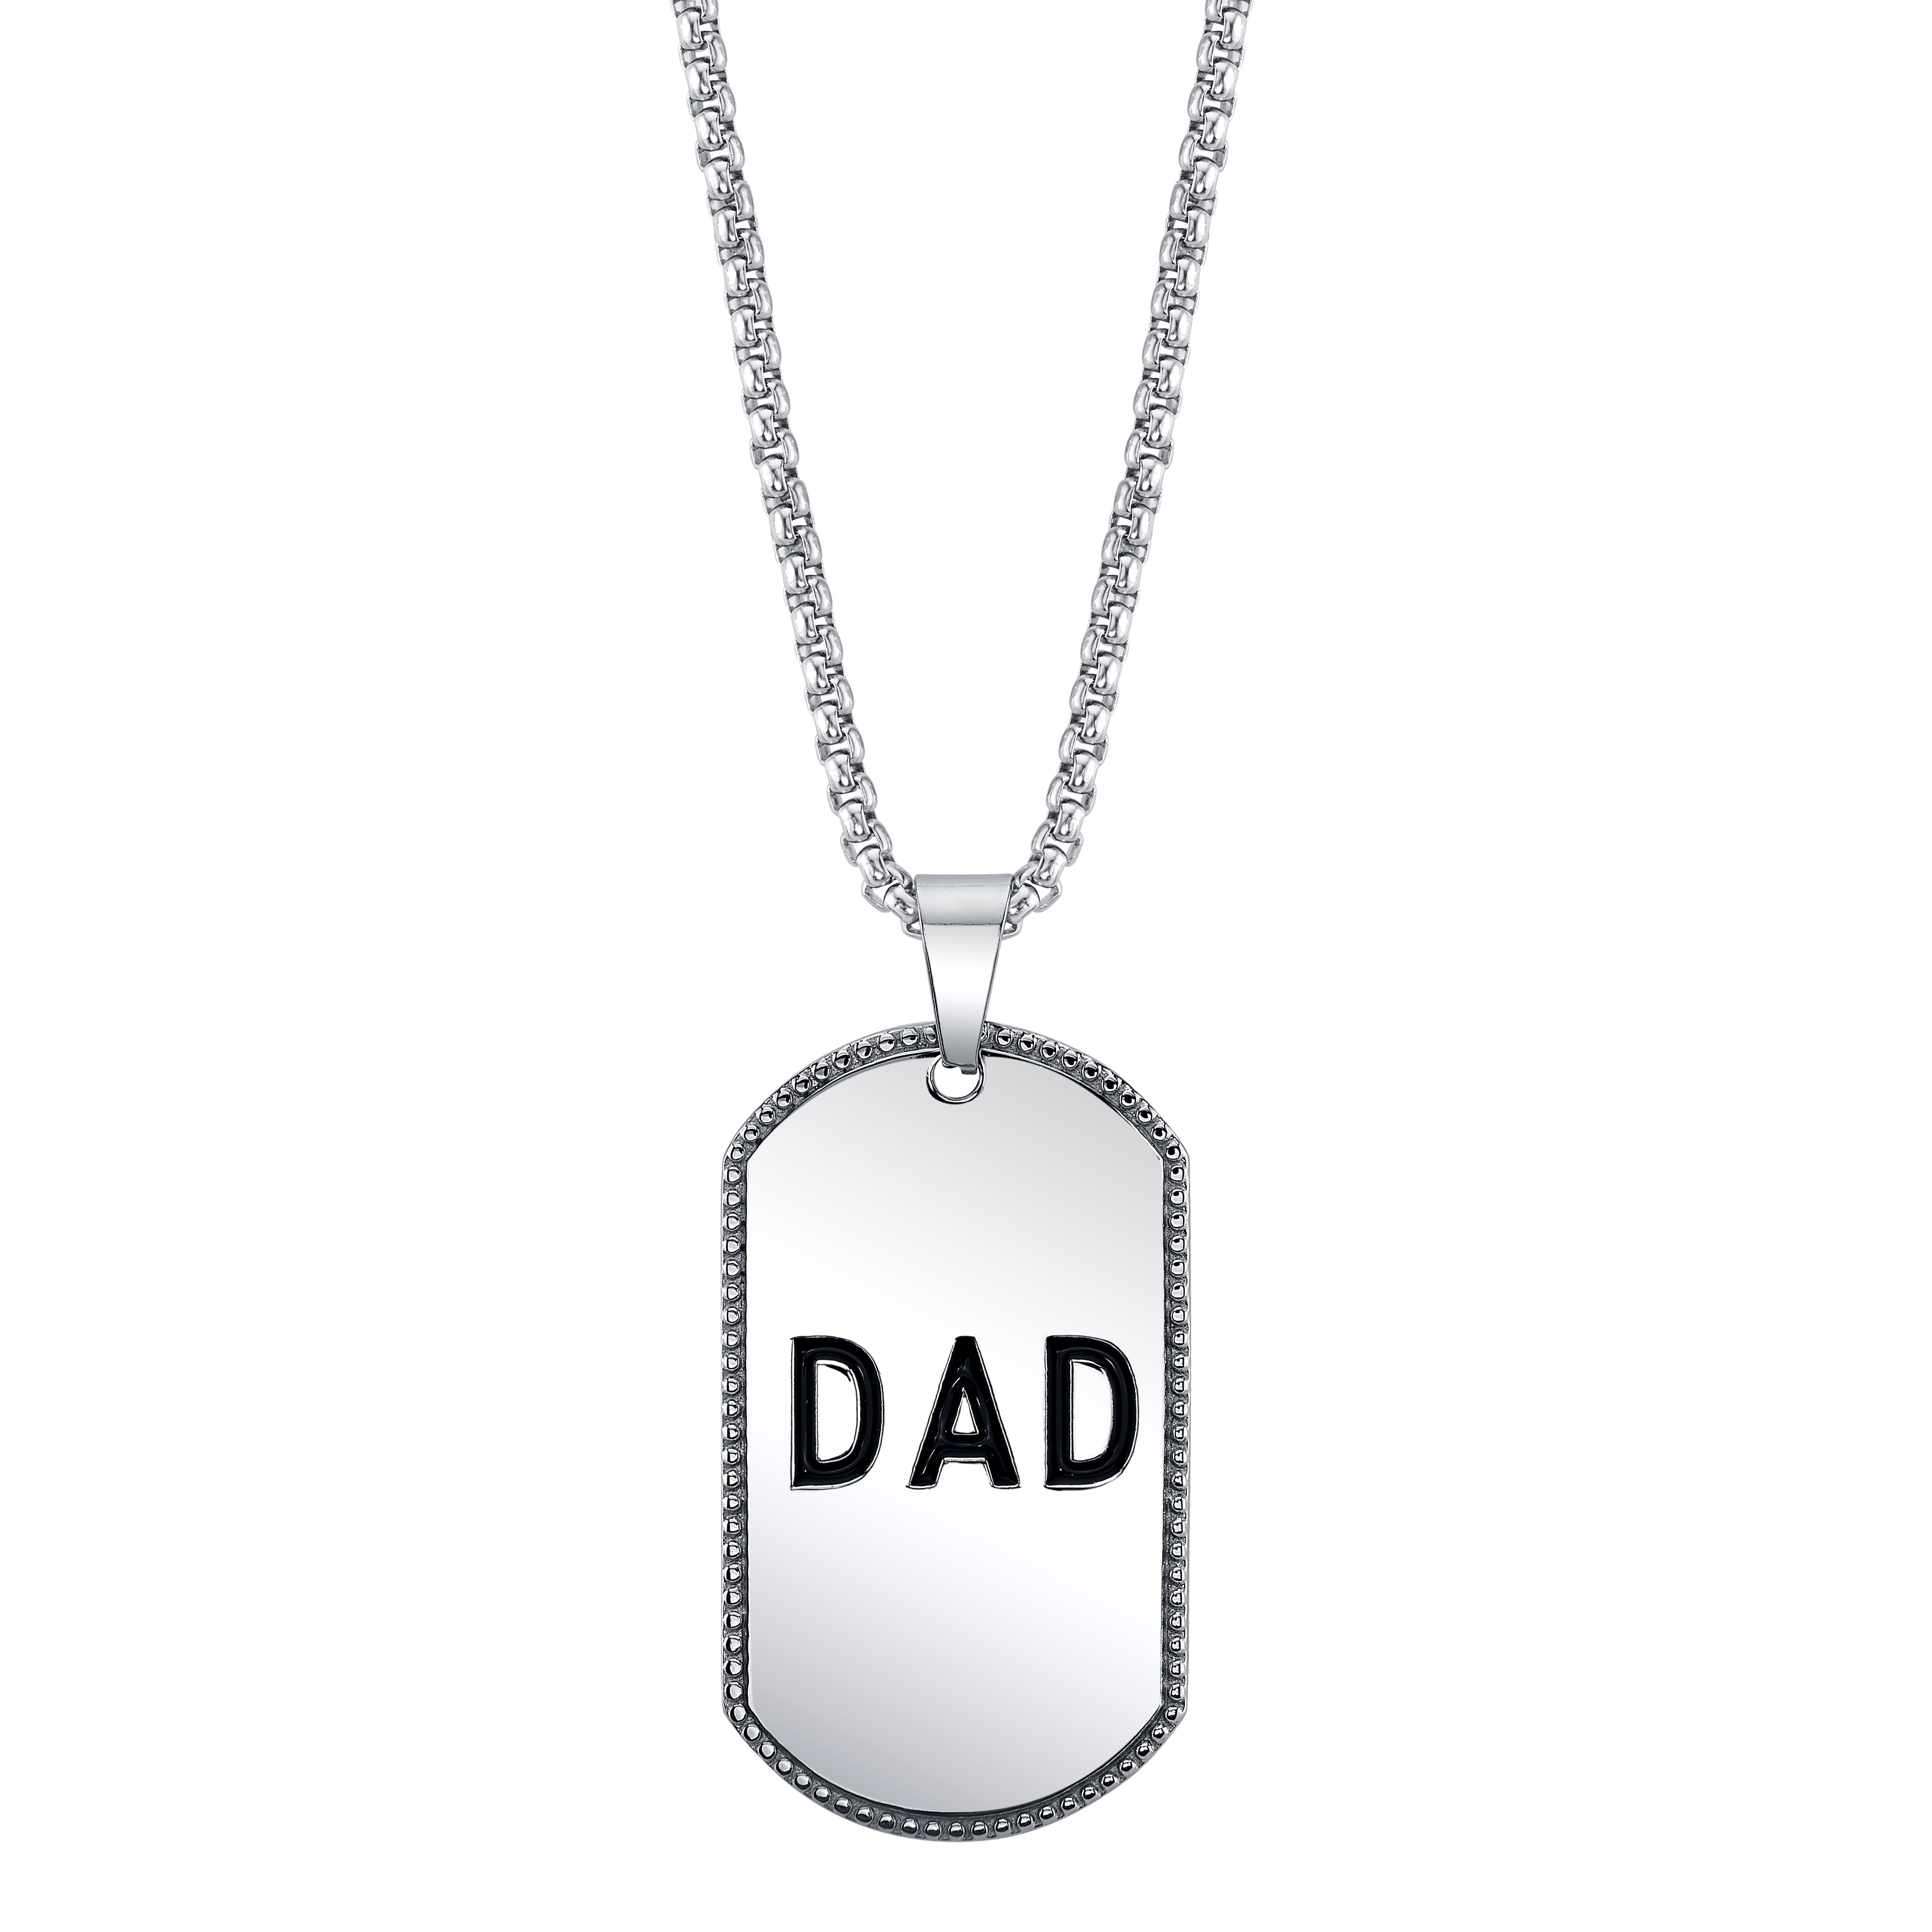 Men's Stainless Steel "Dad" Oxidized Dog Tag Pendant Necklace, 24" Chain